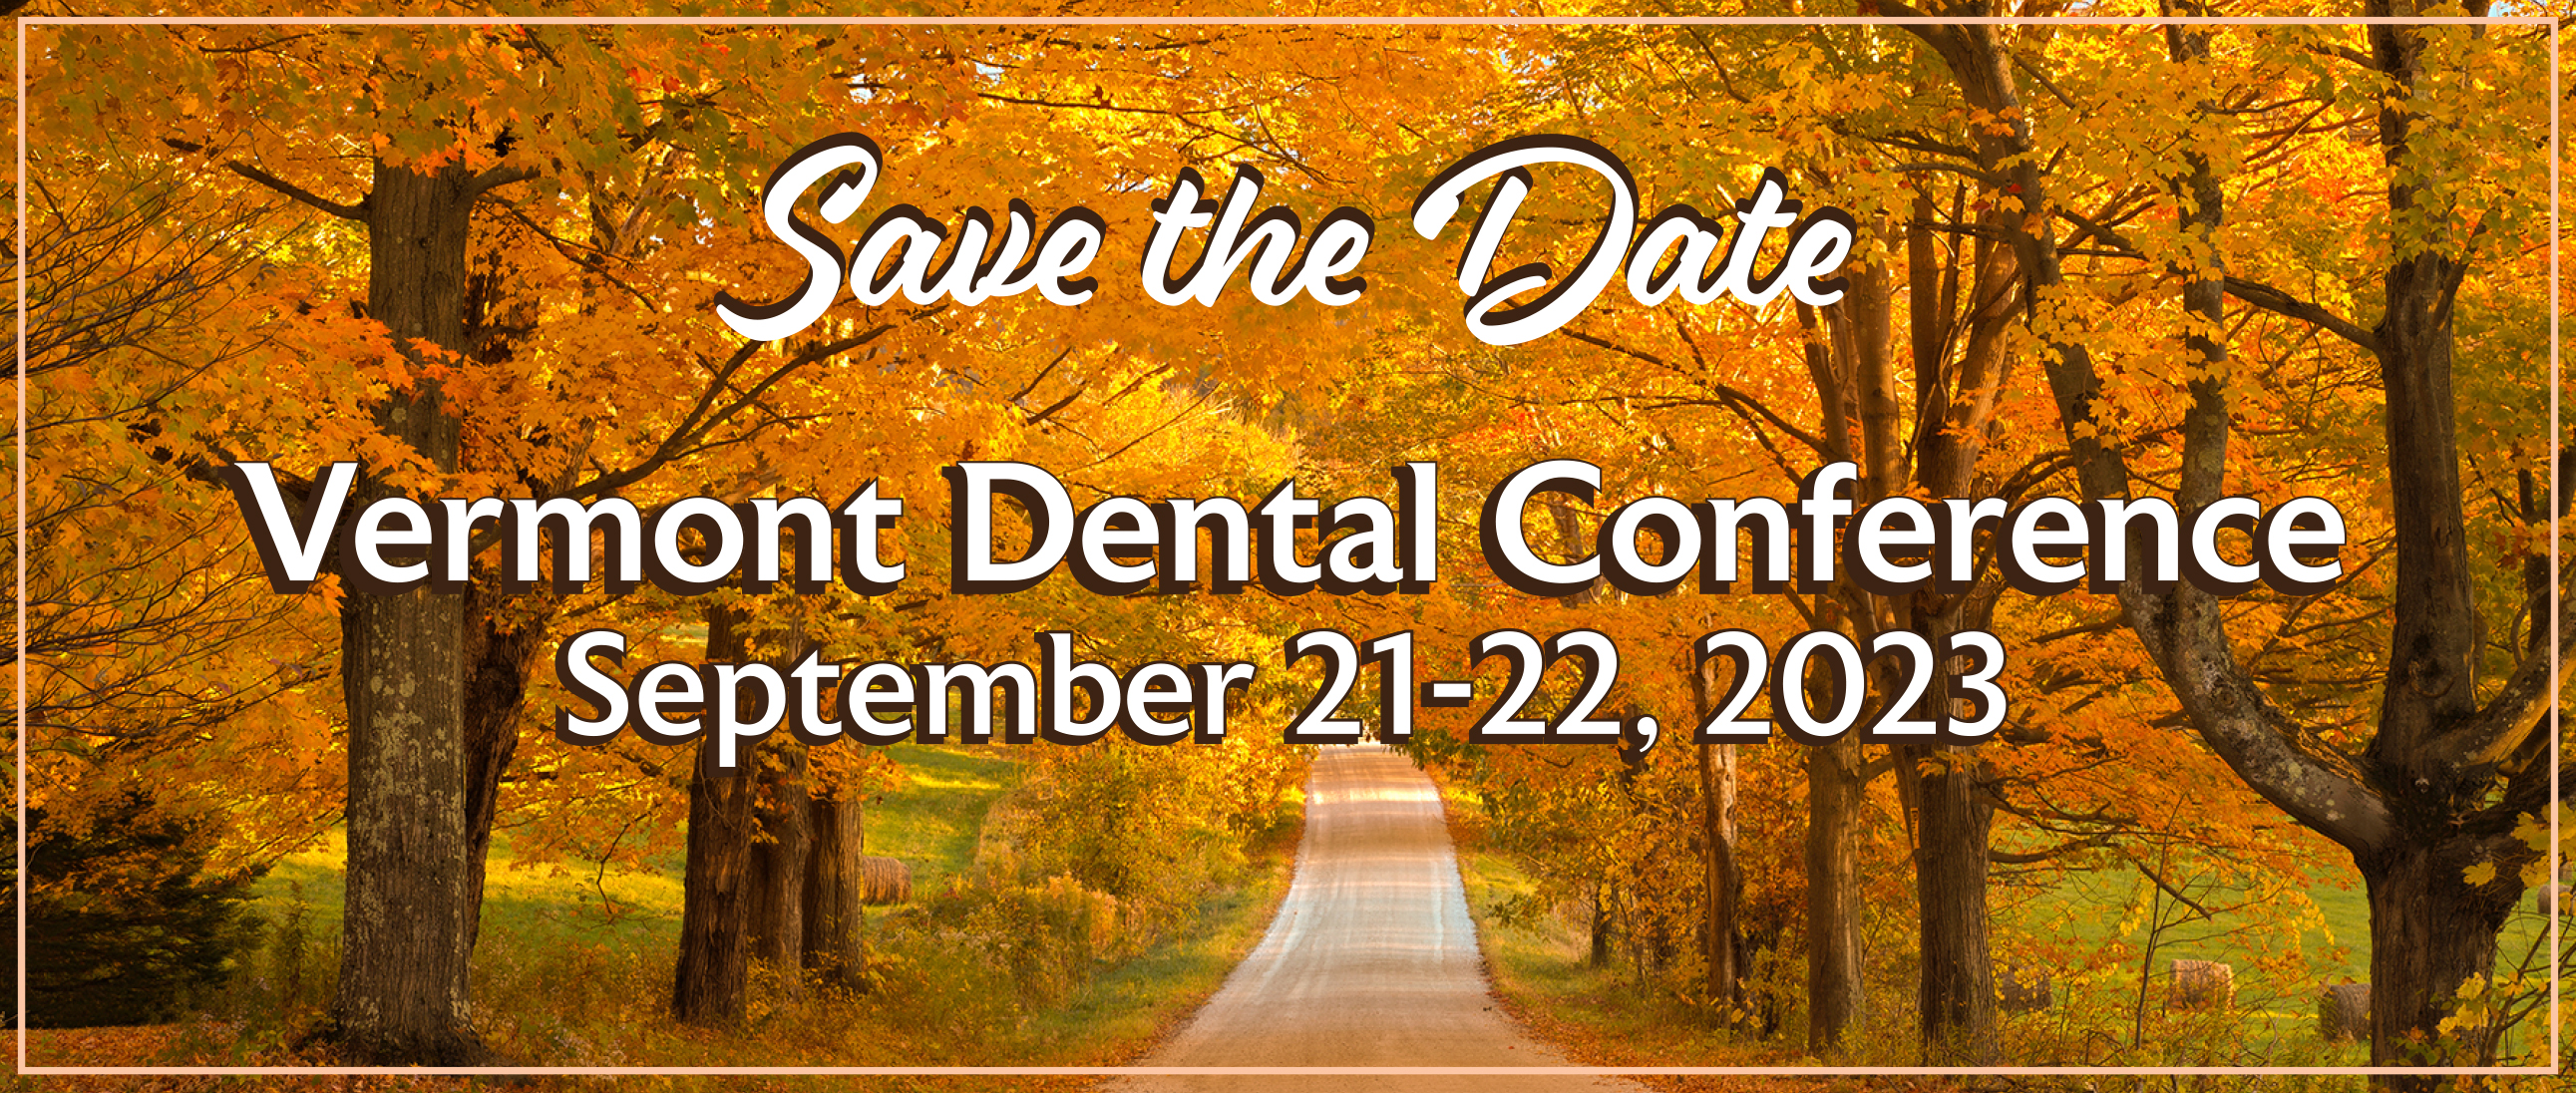 Save the Date. Vermont Dental Conference, September 21-22, 2023